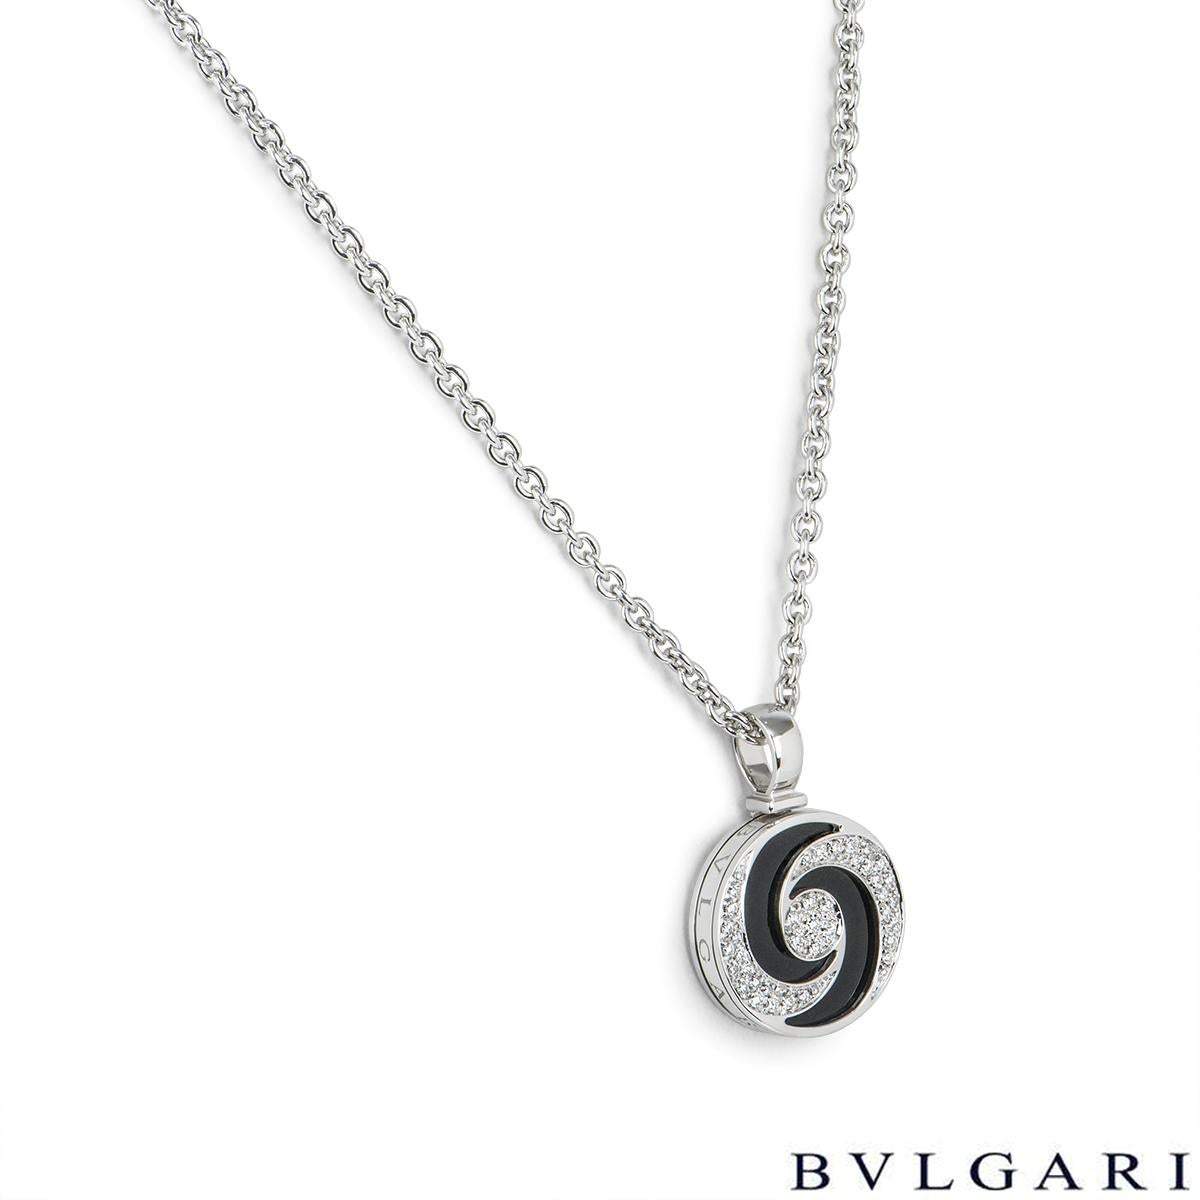 An 18k white gold and stainless steel pendant by Bvlgari from the Optical Illusion collection. The pendant consists of a rotating disc that measures 2.3cm in width and spins in both a clockwise and anti-clockwise motion. It features an onyx inlay